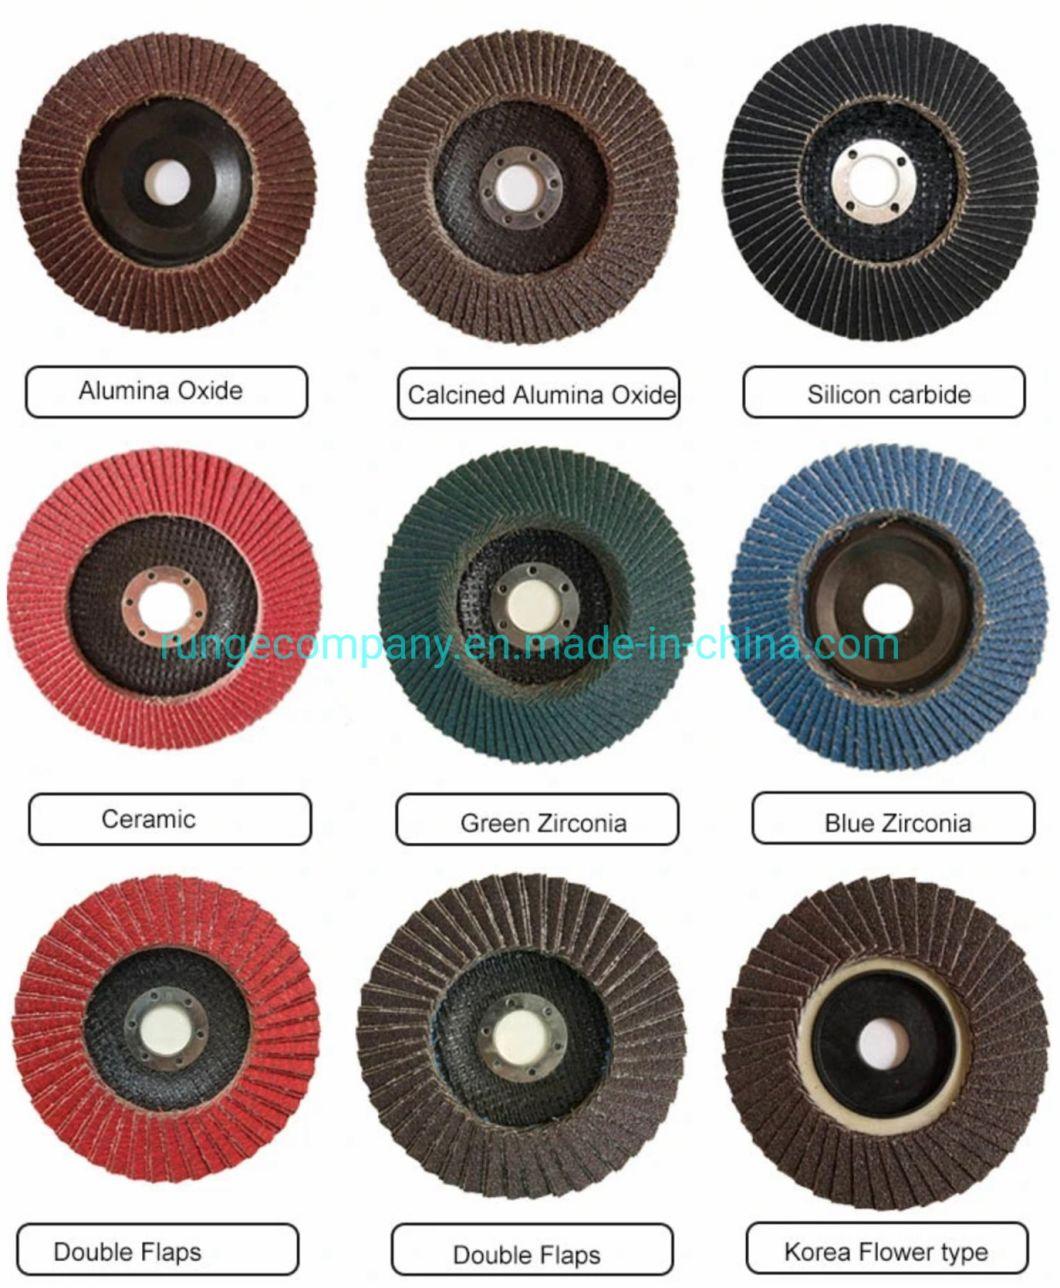 Power Electric Tools Accessories Ultra Thin Cutting Discs Wheels for Metal 105mm X 1mm X 16mm